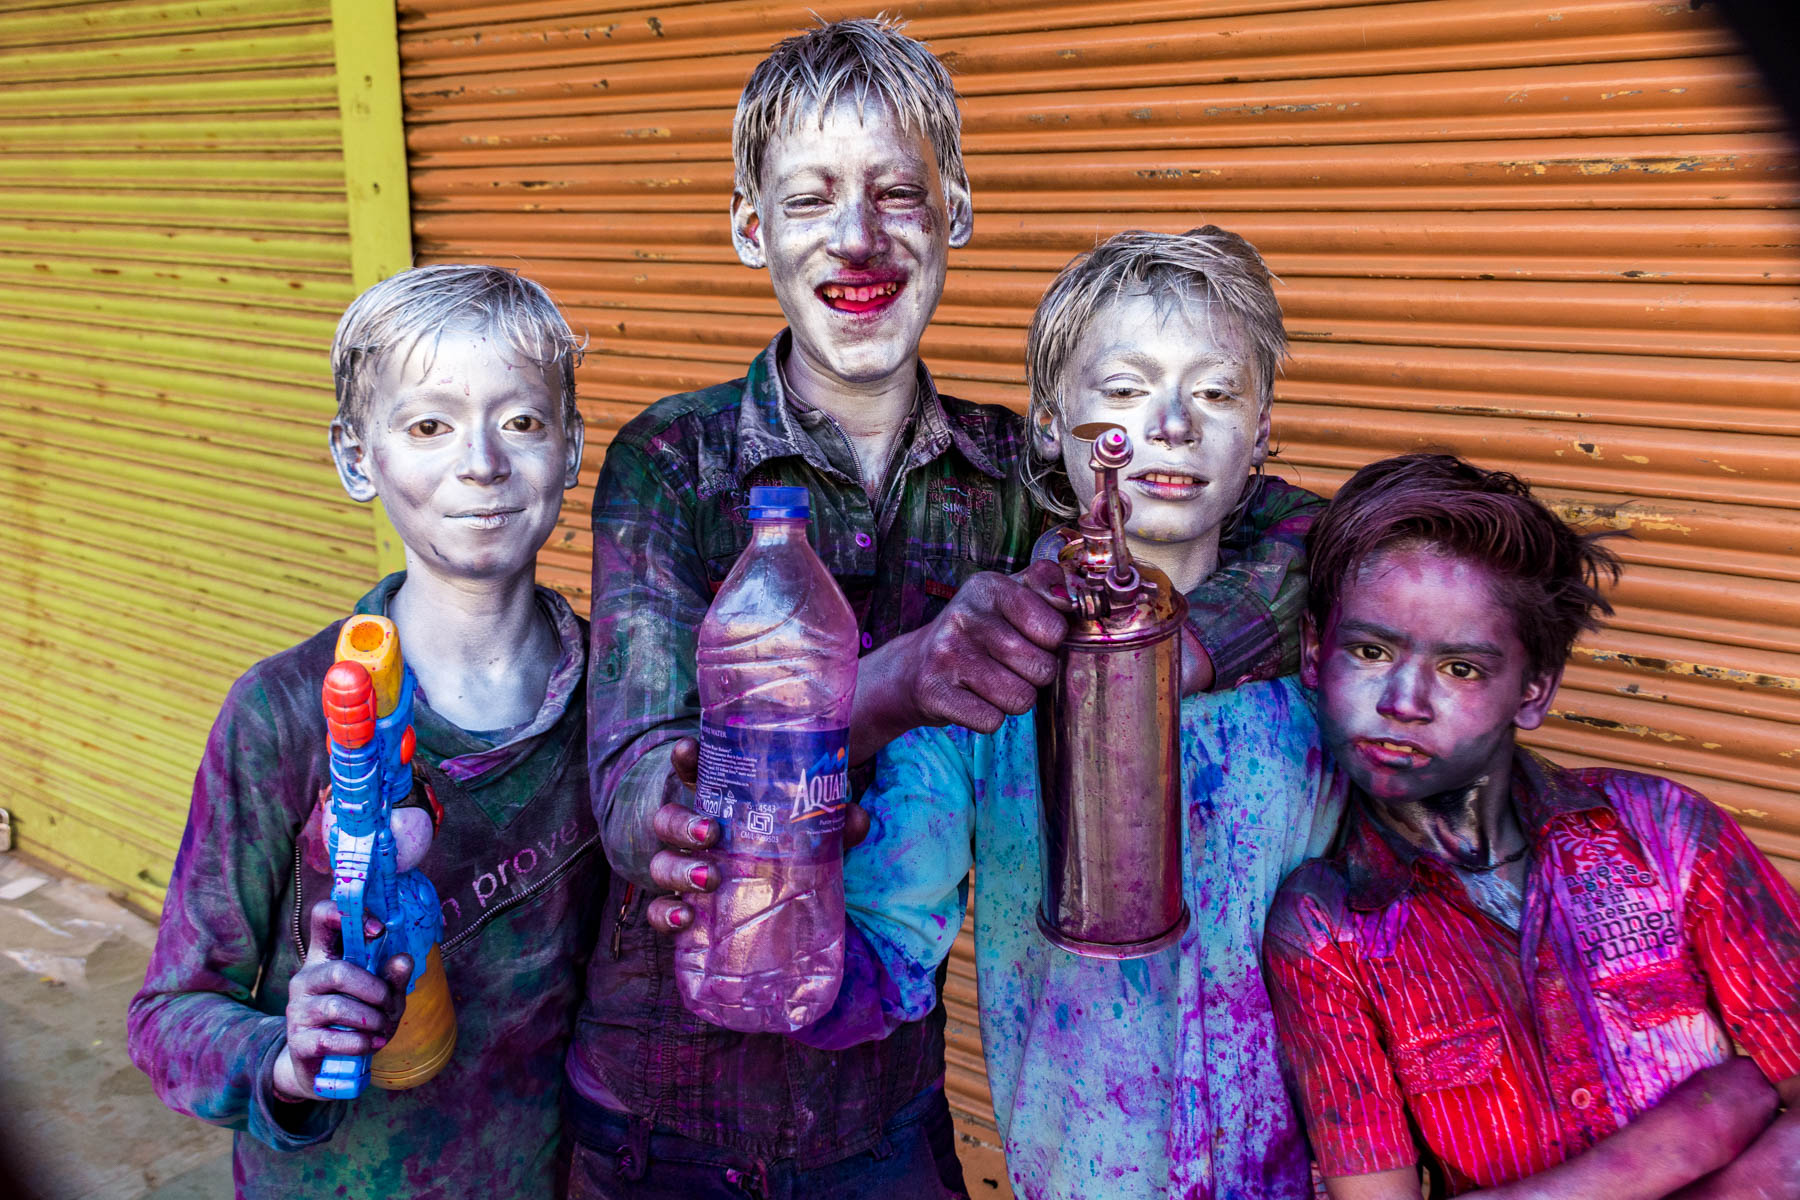 What you need know about playing Holi in Varanasi, India - Local boys painted silver for Holi - Lost With Purpose